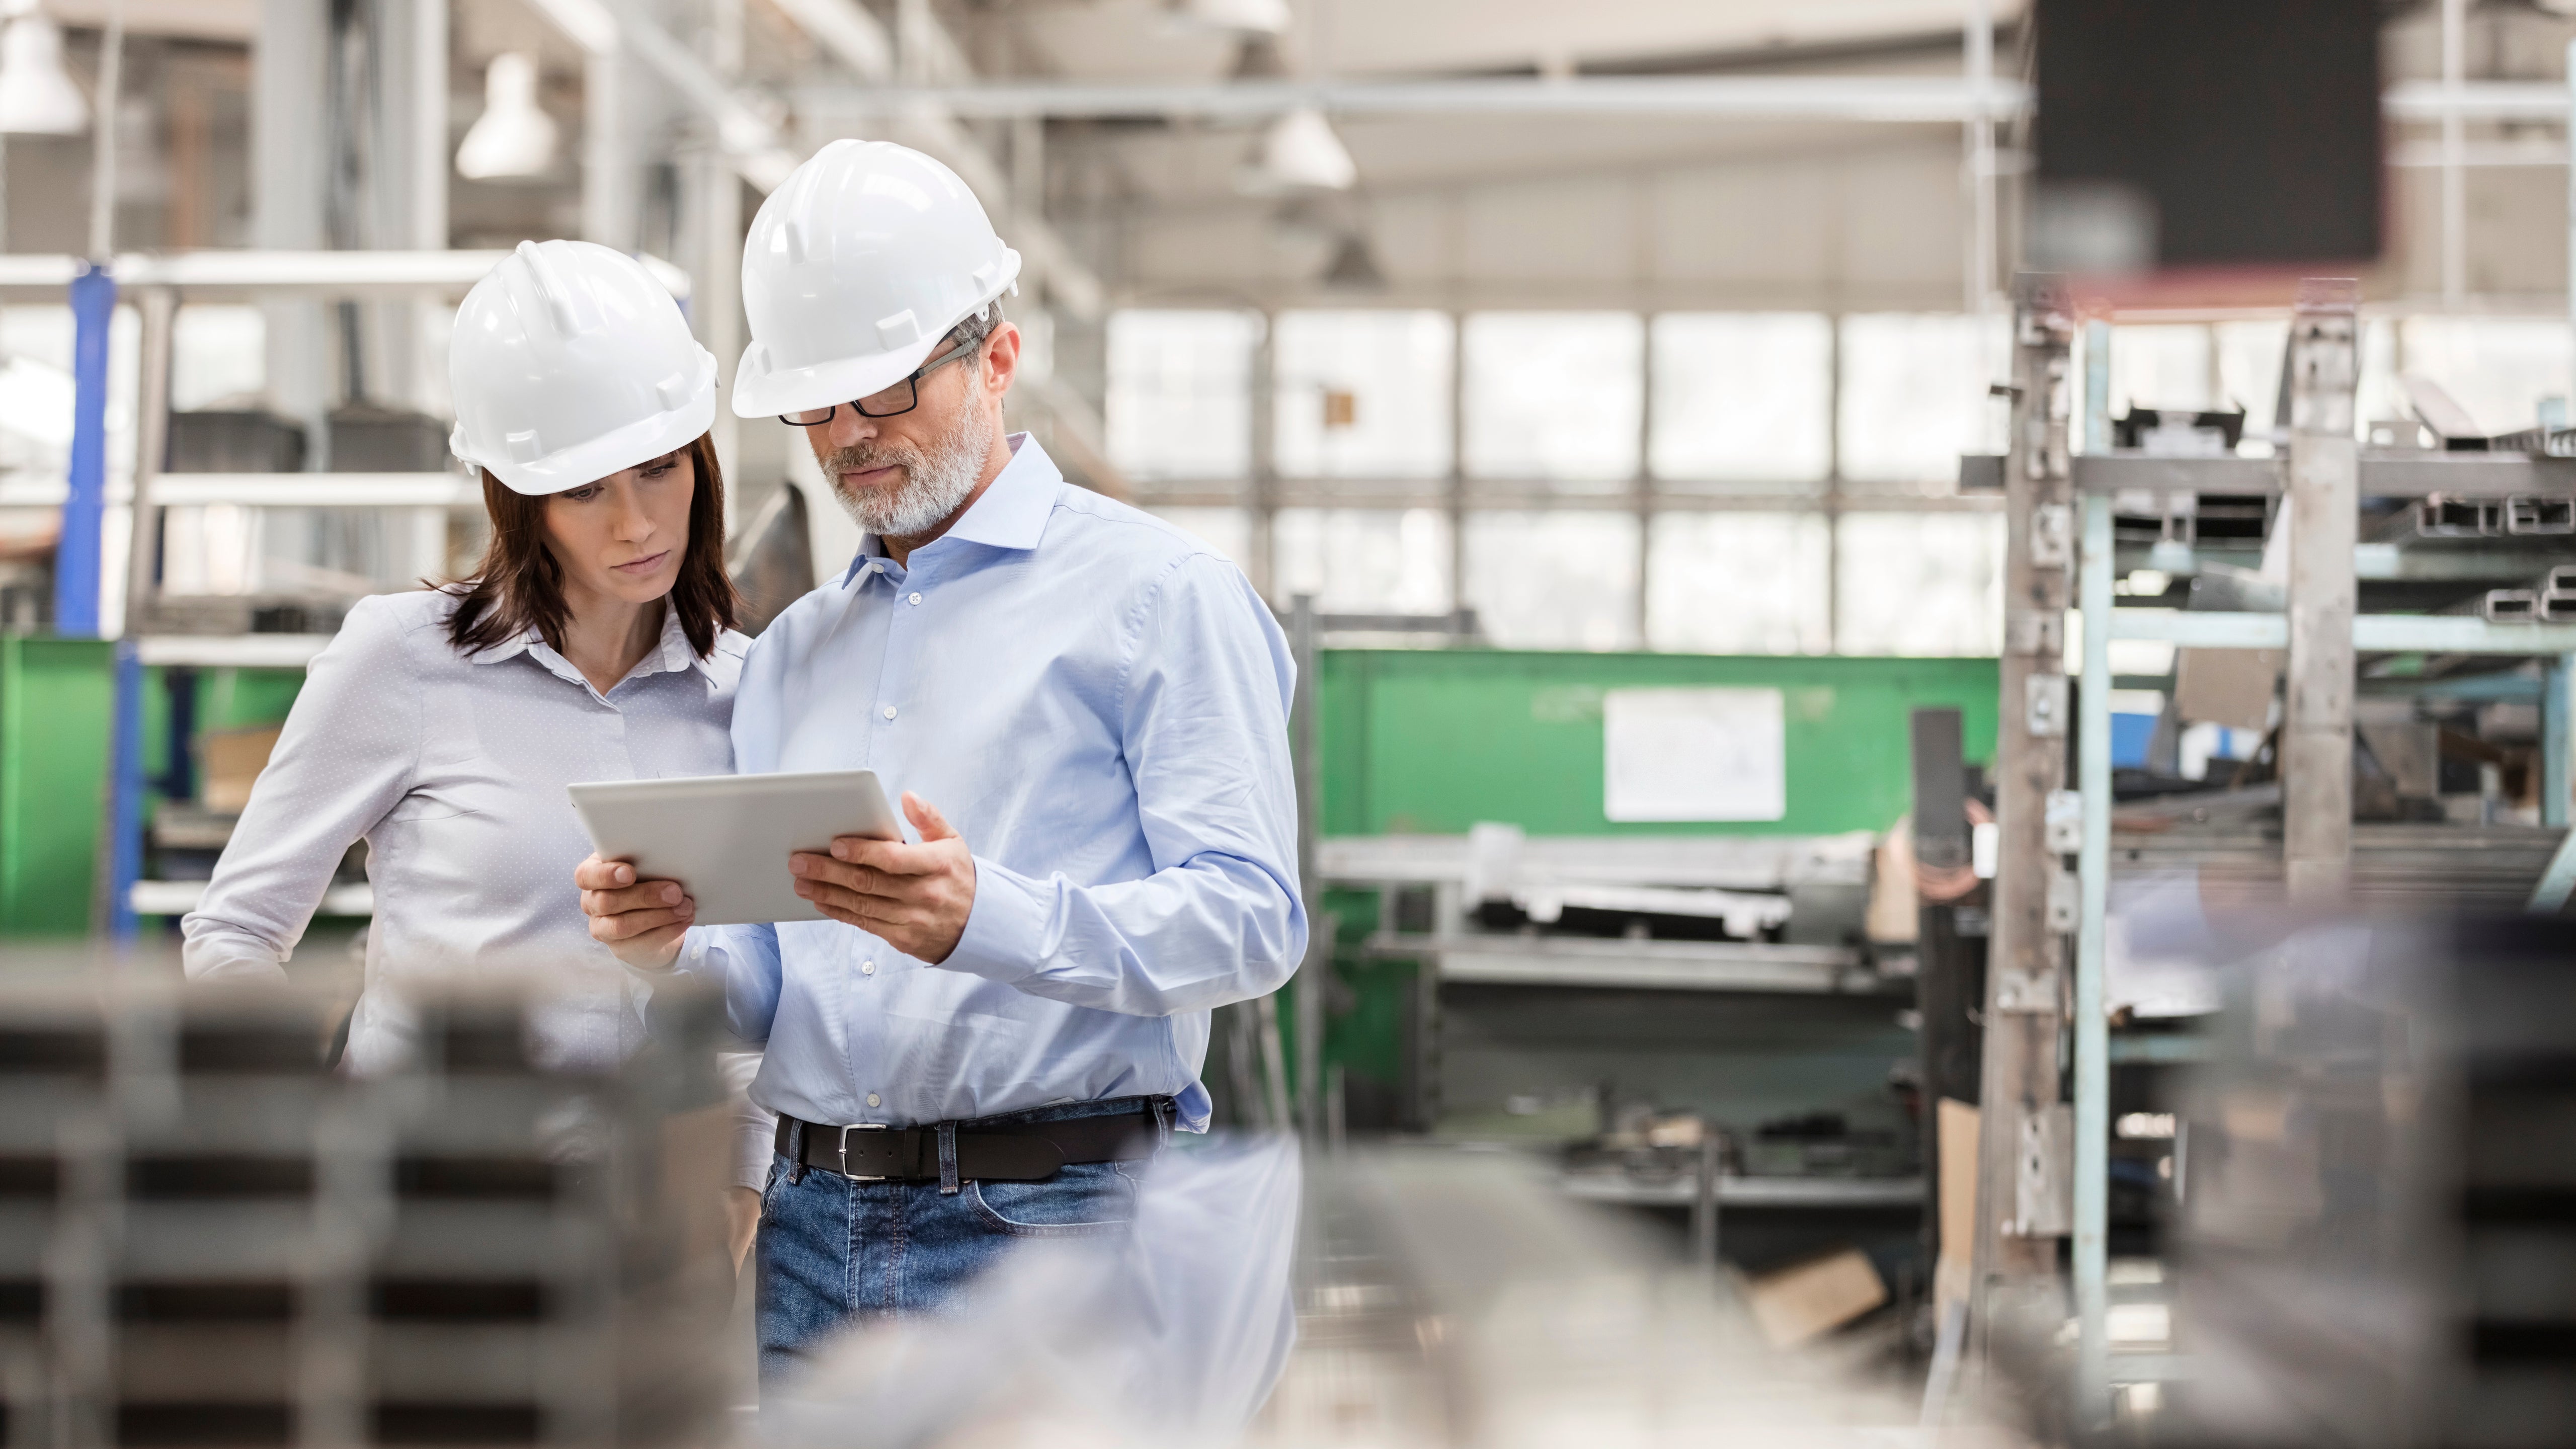 2 professionals wearing hard hats looking at tablet in industrial setting